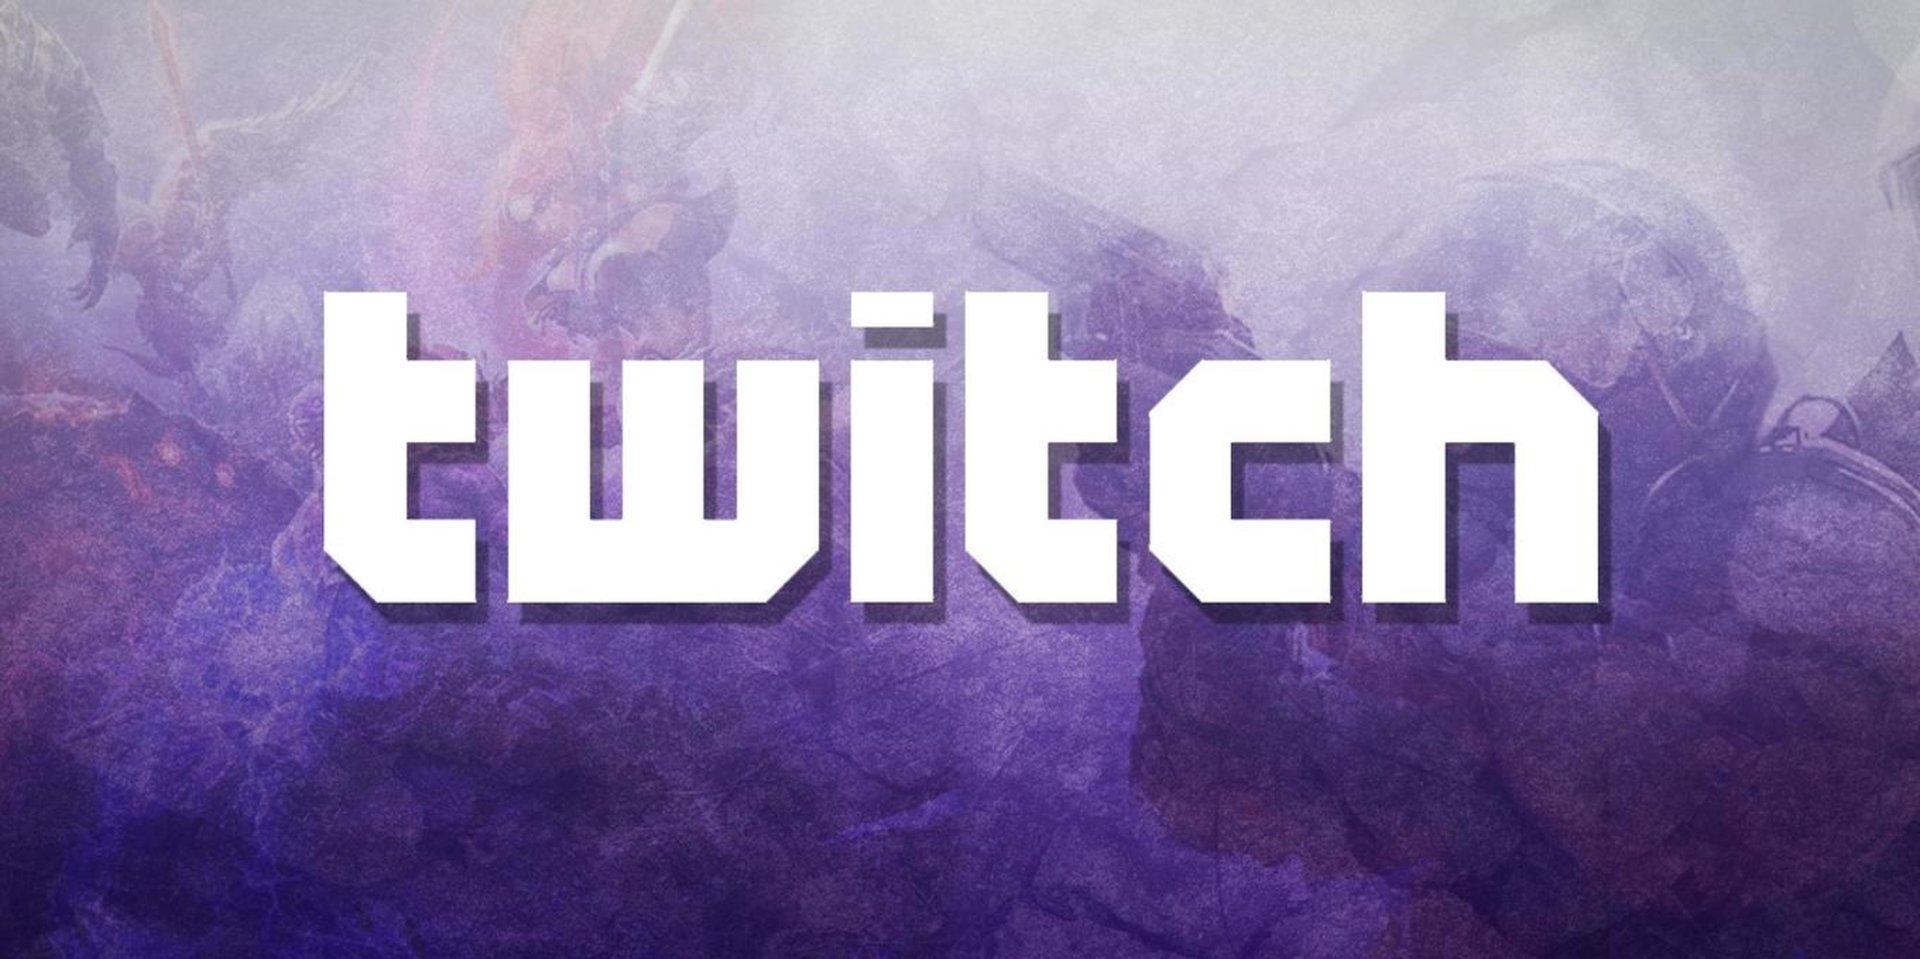 Awesome Twitch wallpapers collection